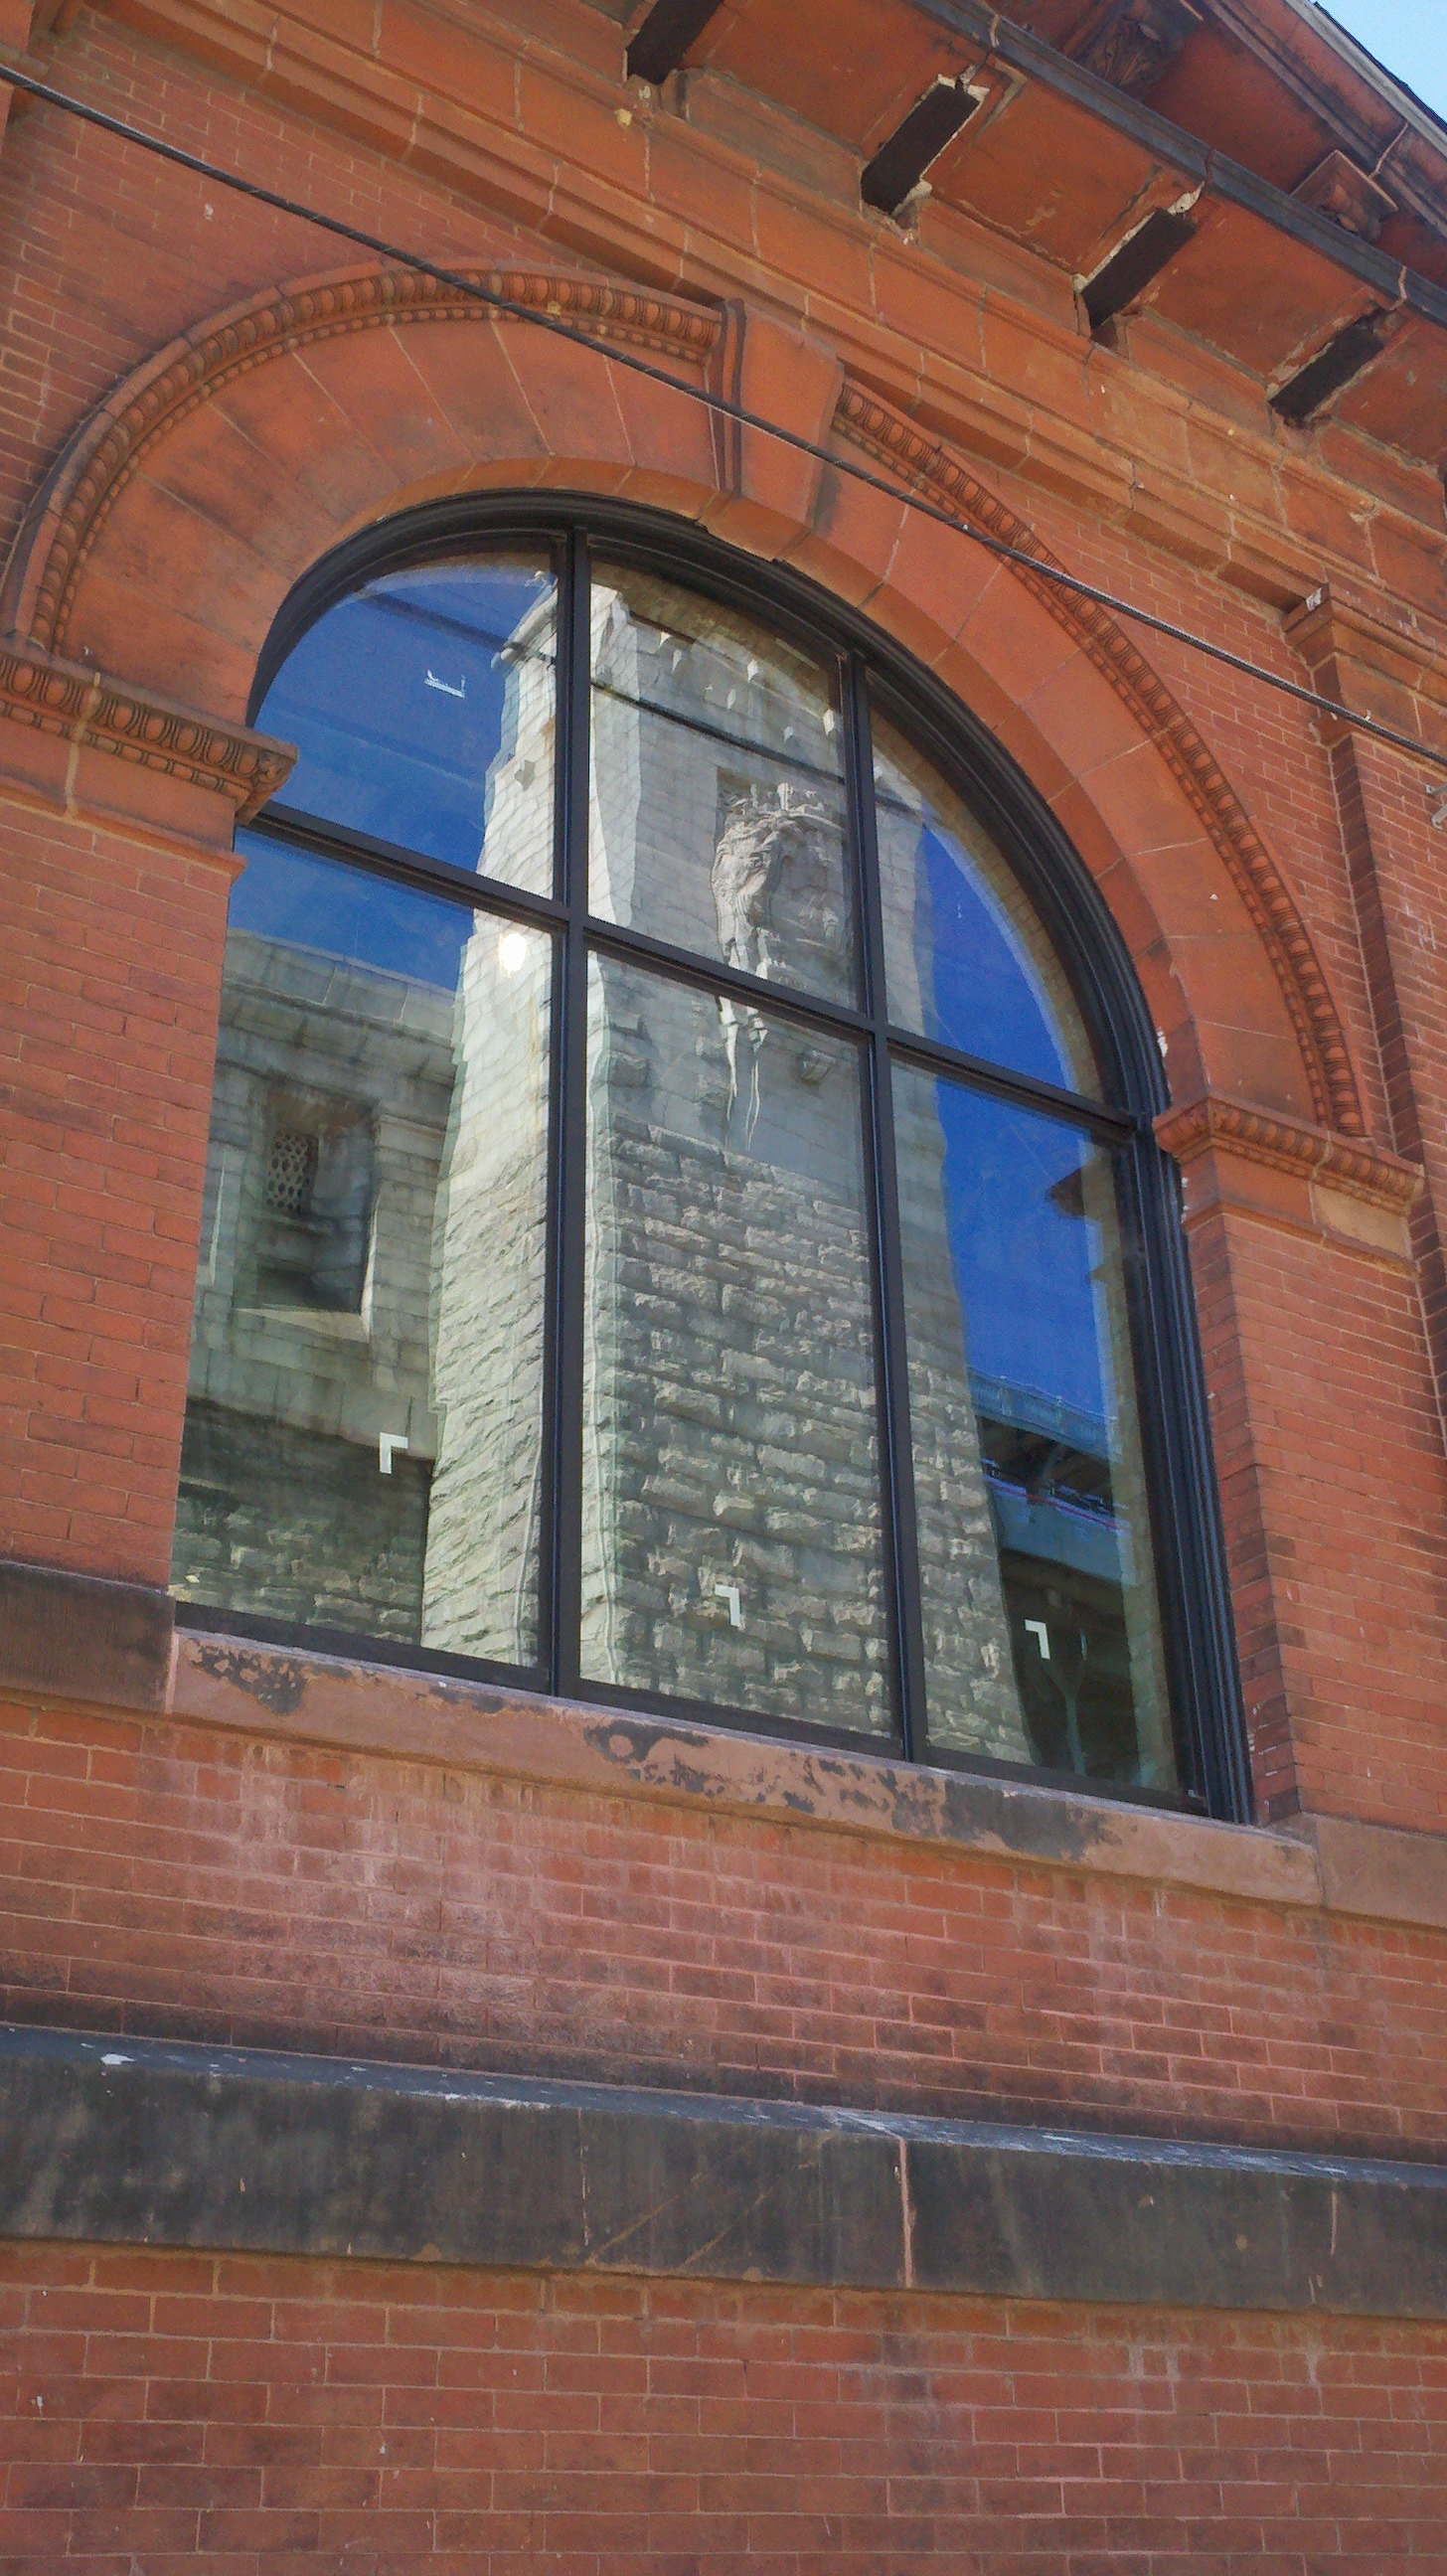 A tower of the Ben Franklin Bridge is reflected in a new FringeArts window